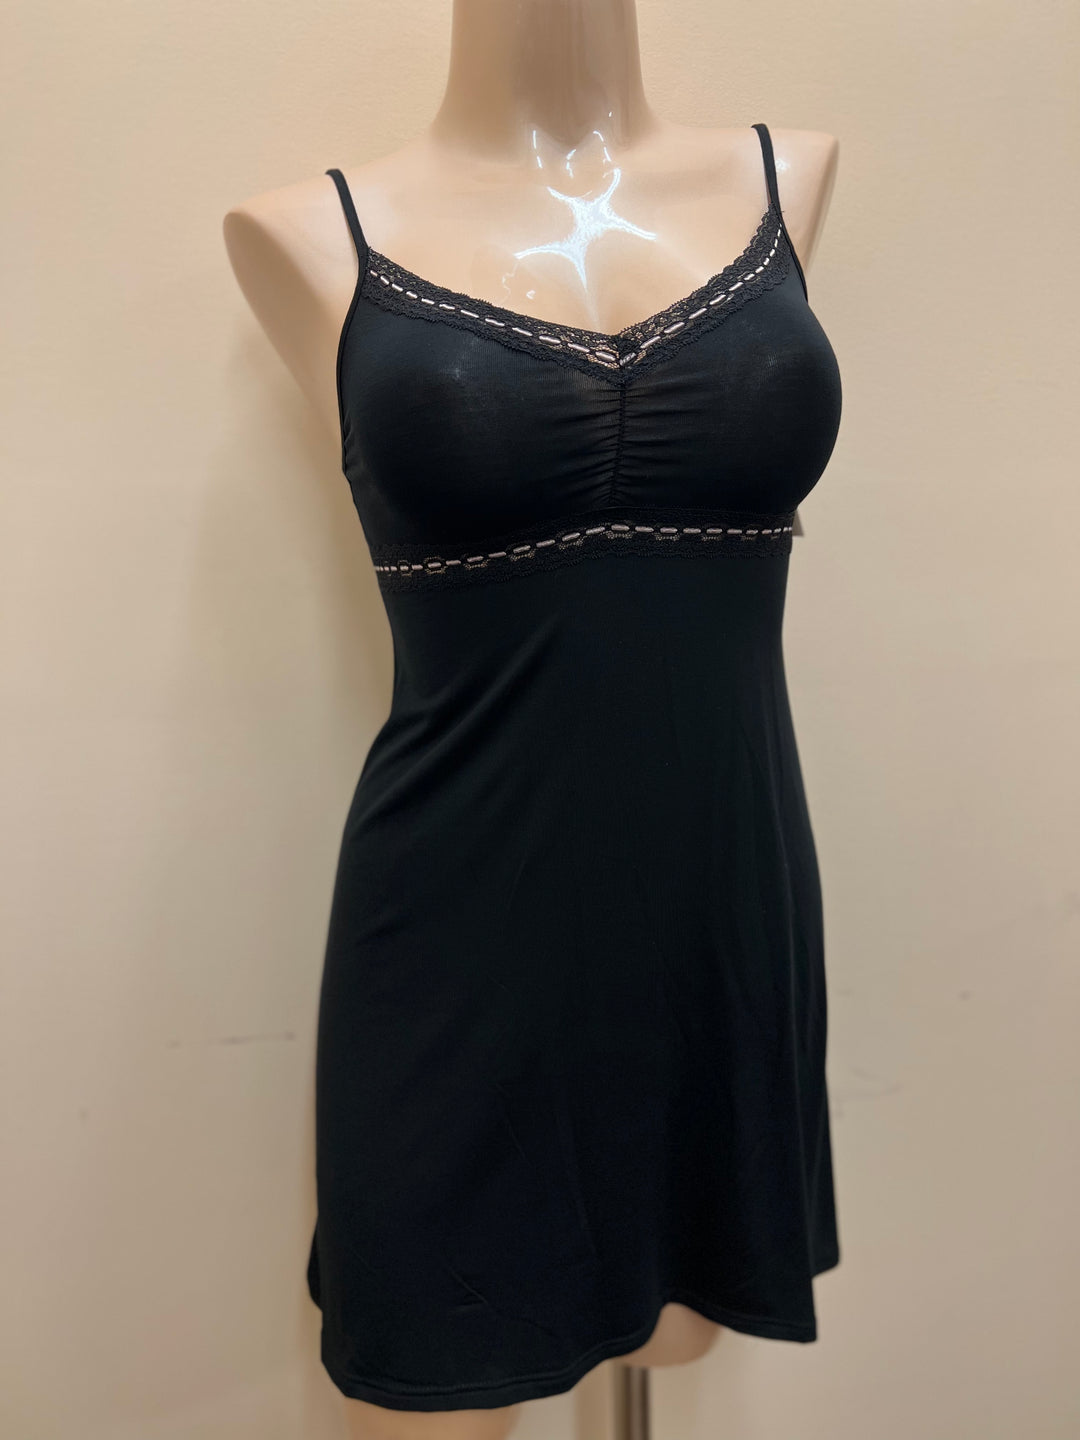 Arianne Anna Chemise - Size Small